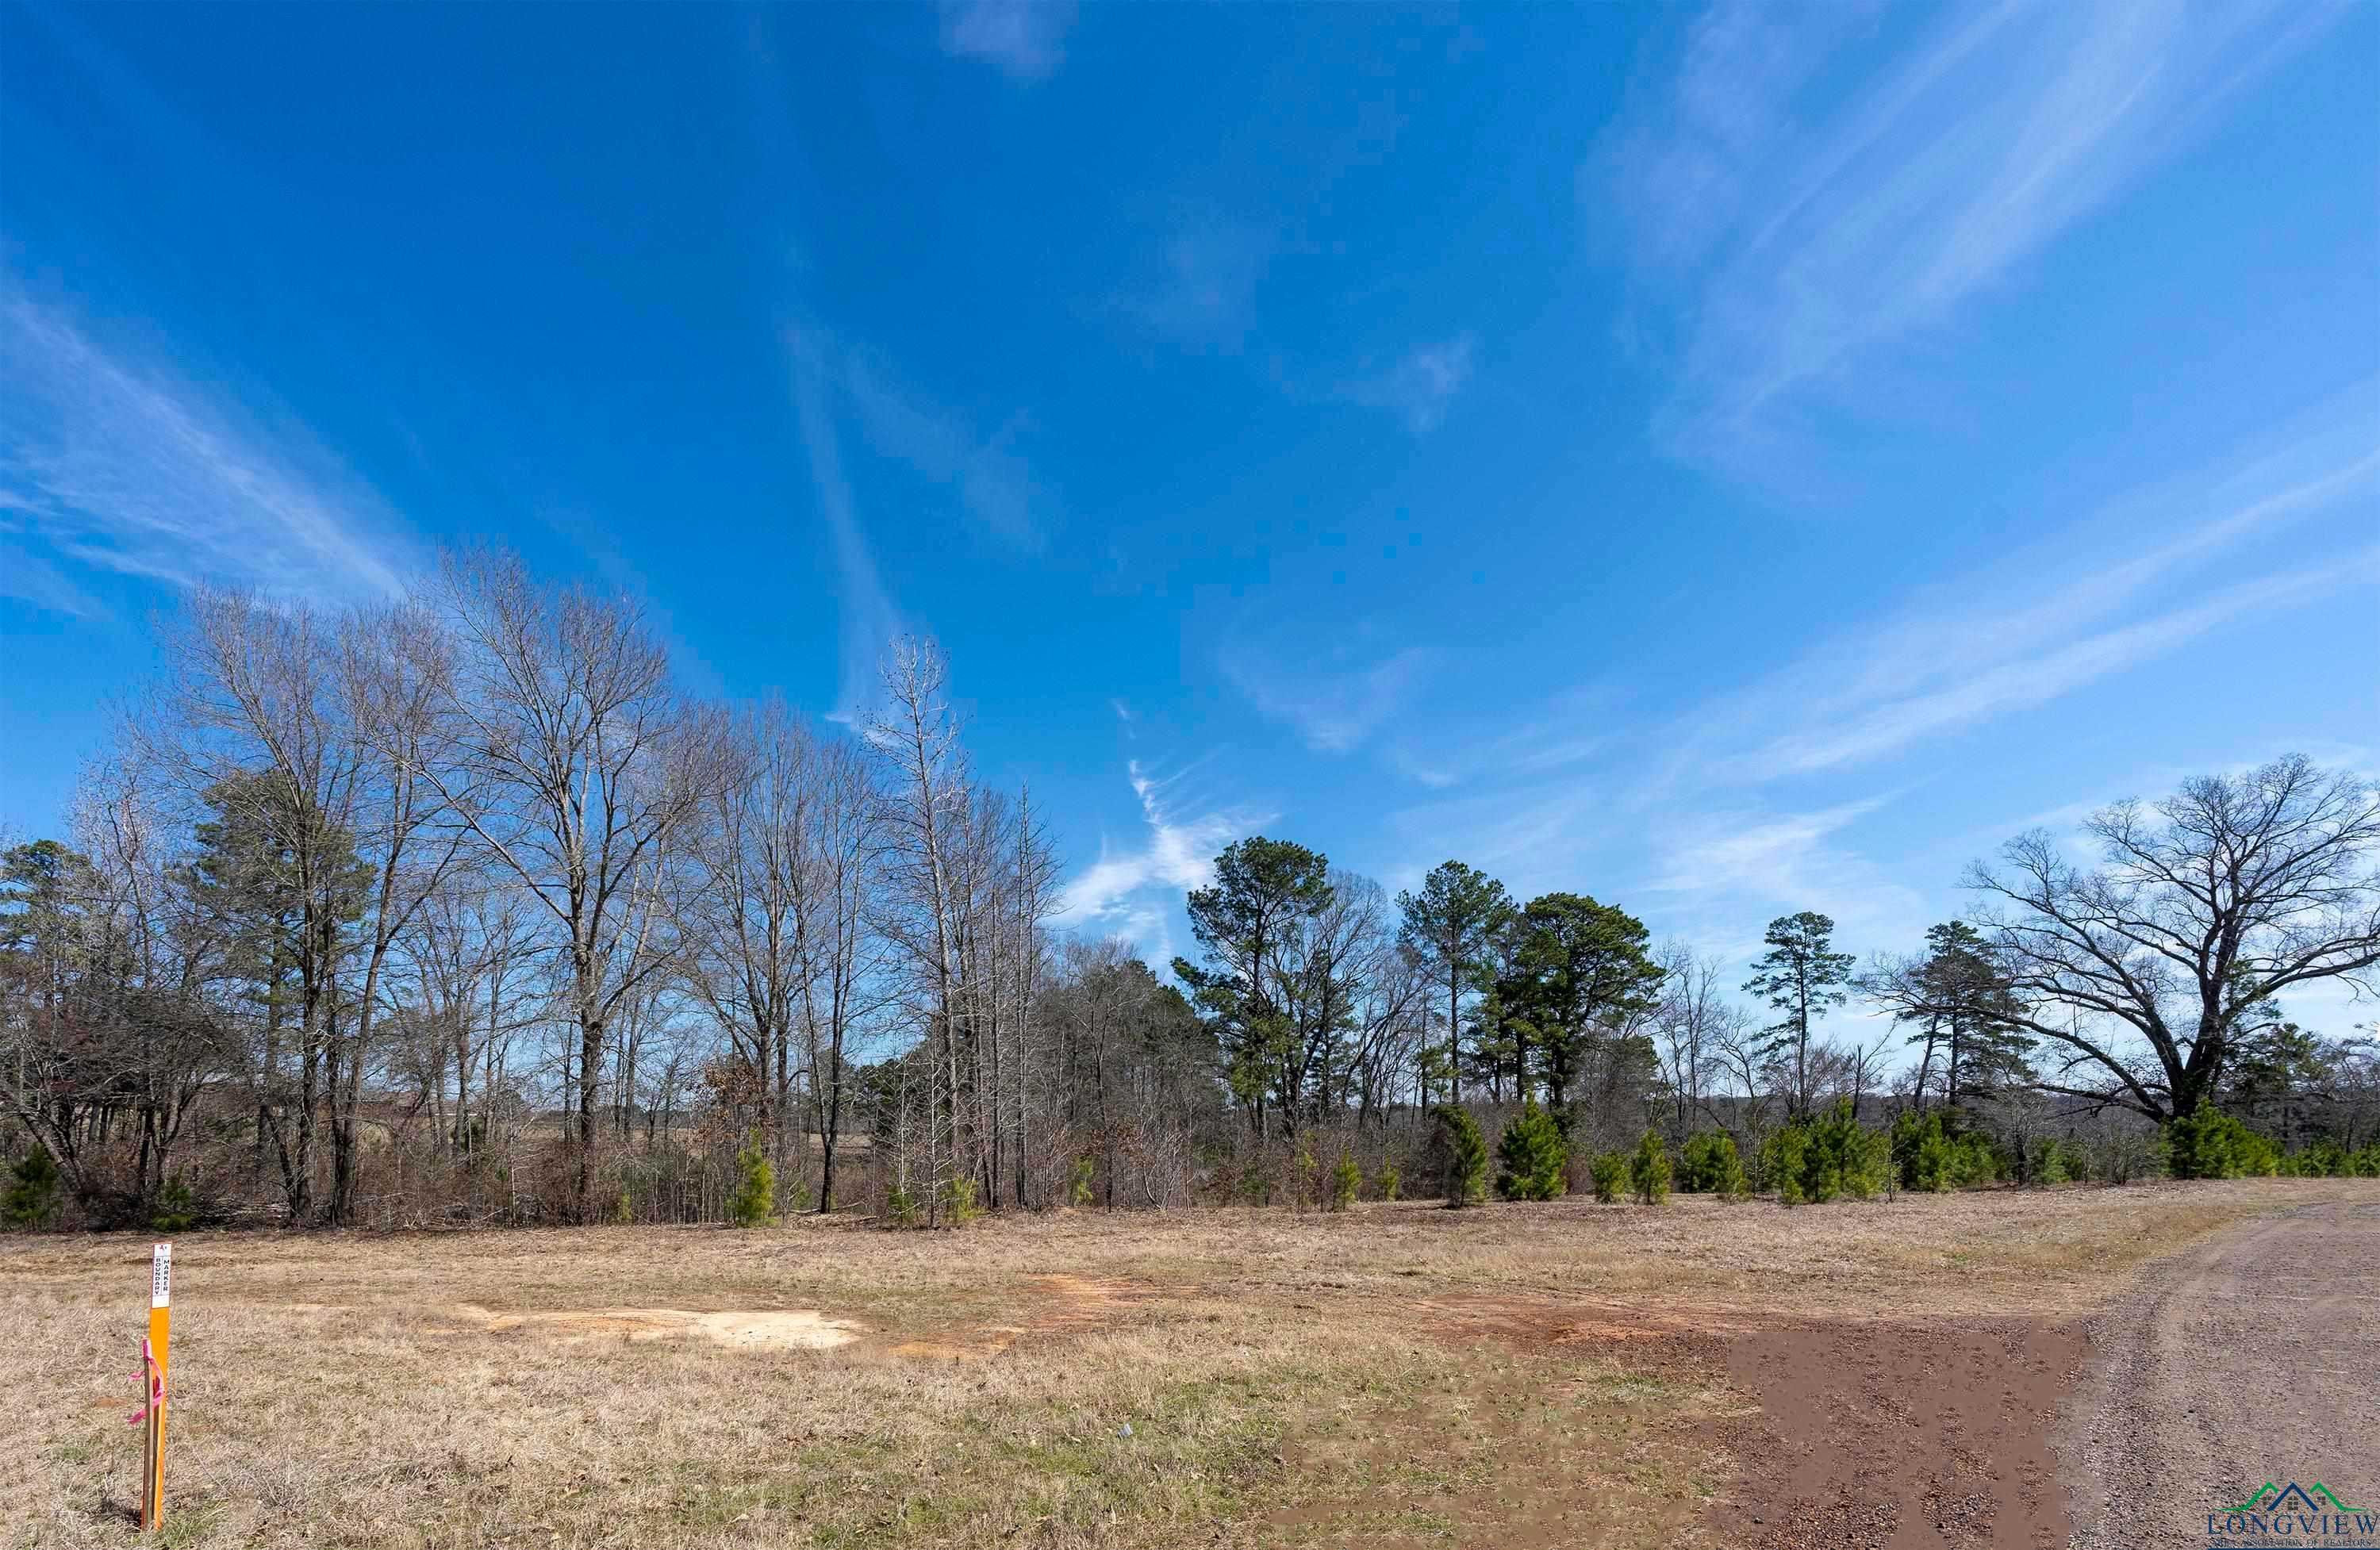 Clydesdale Ct., 20221199, Longview, Lot,  for sale, Dona  Willett, Summers Cook & CO.